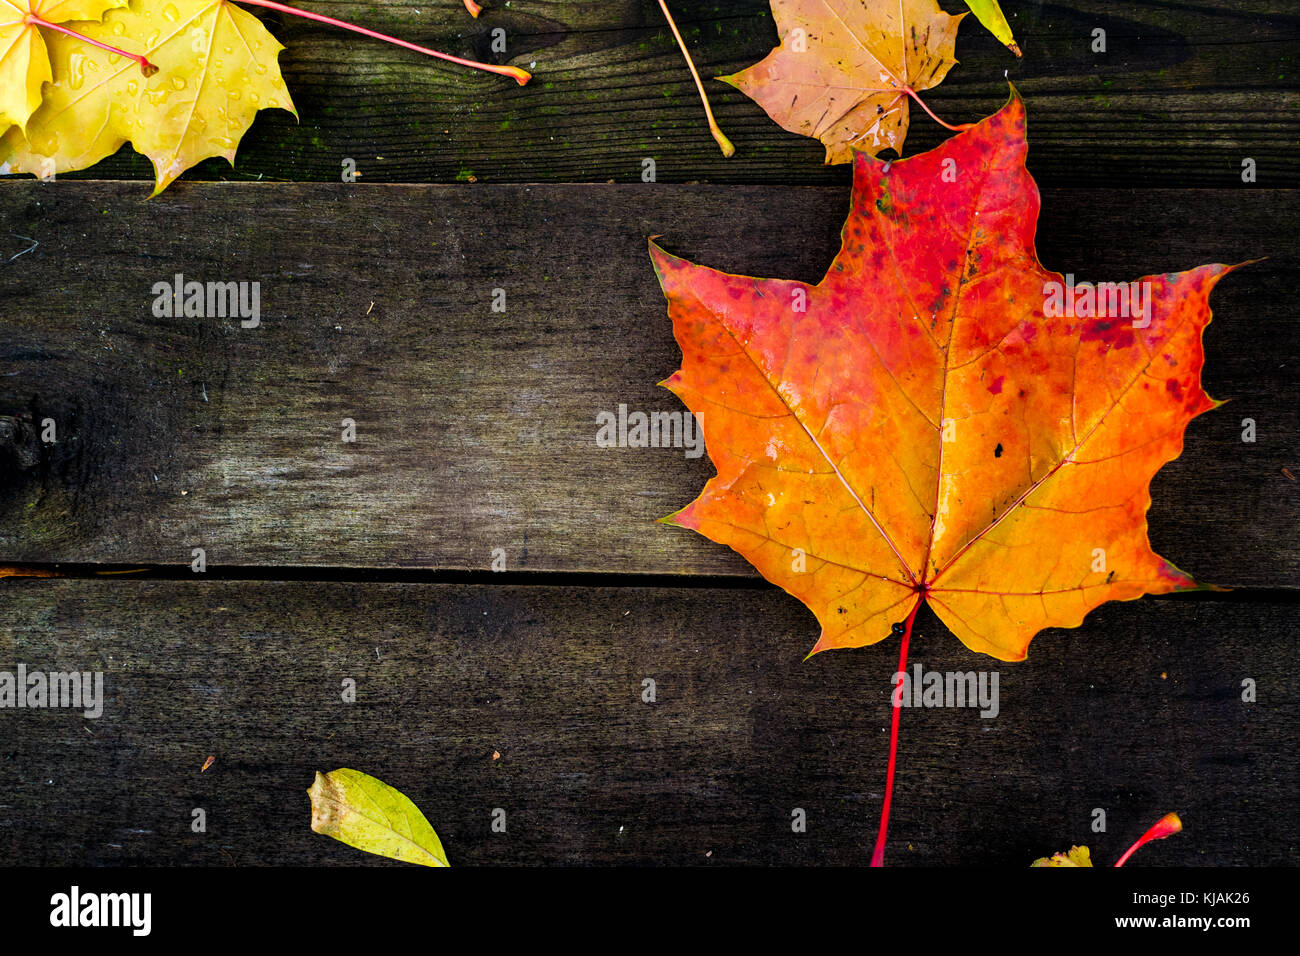 Red maple leaf on a wooden background Stock Photo